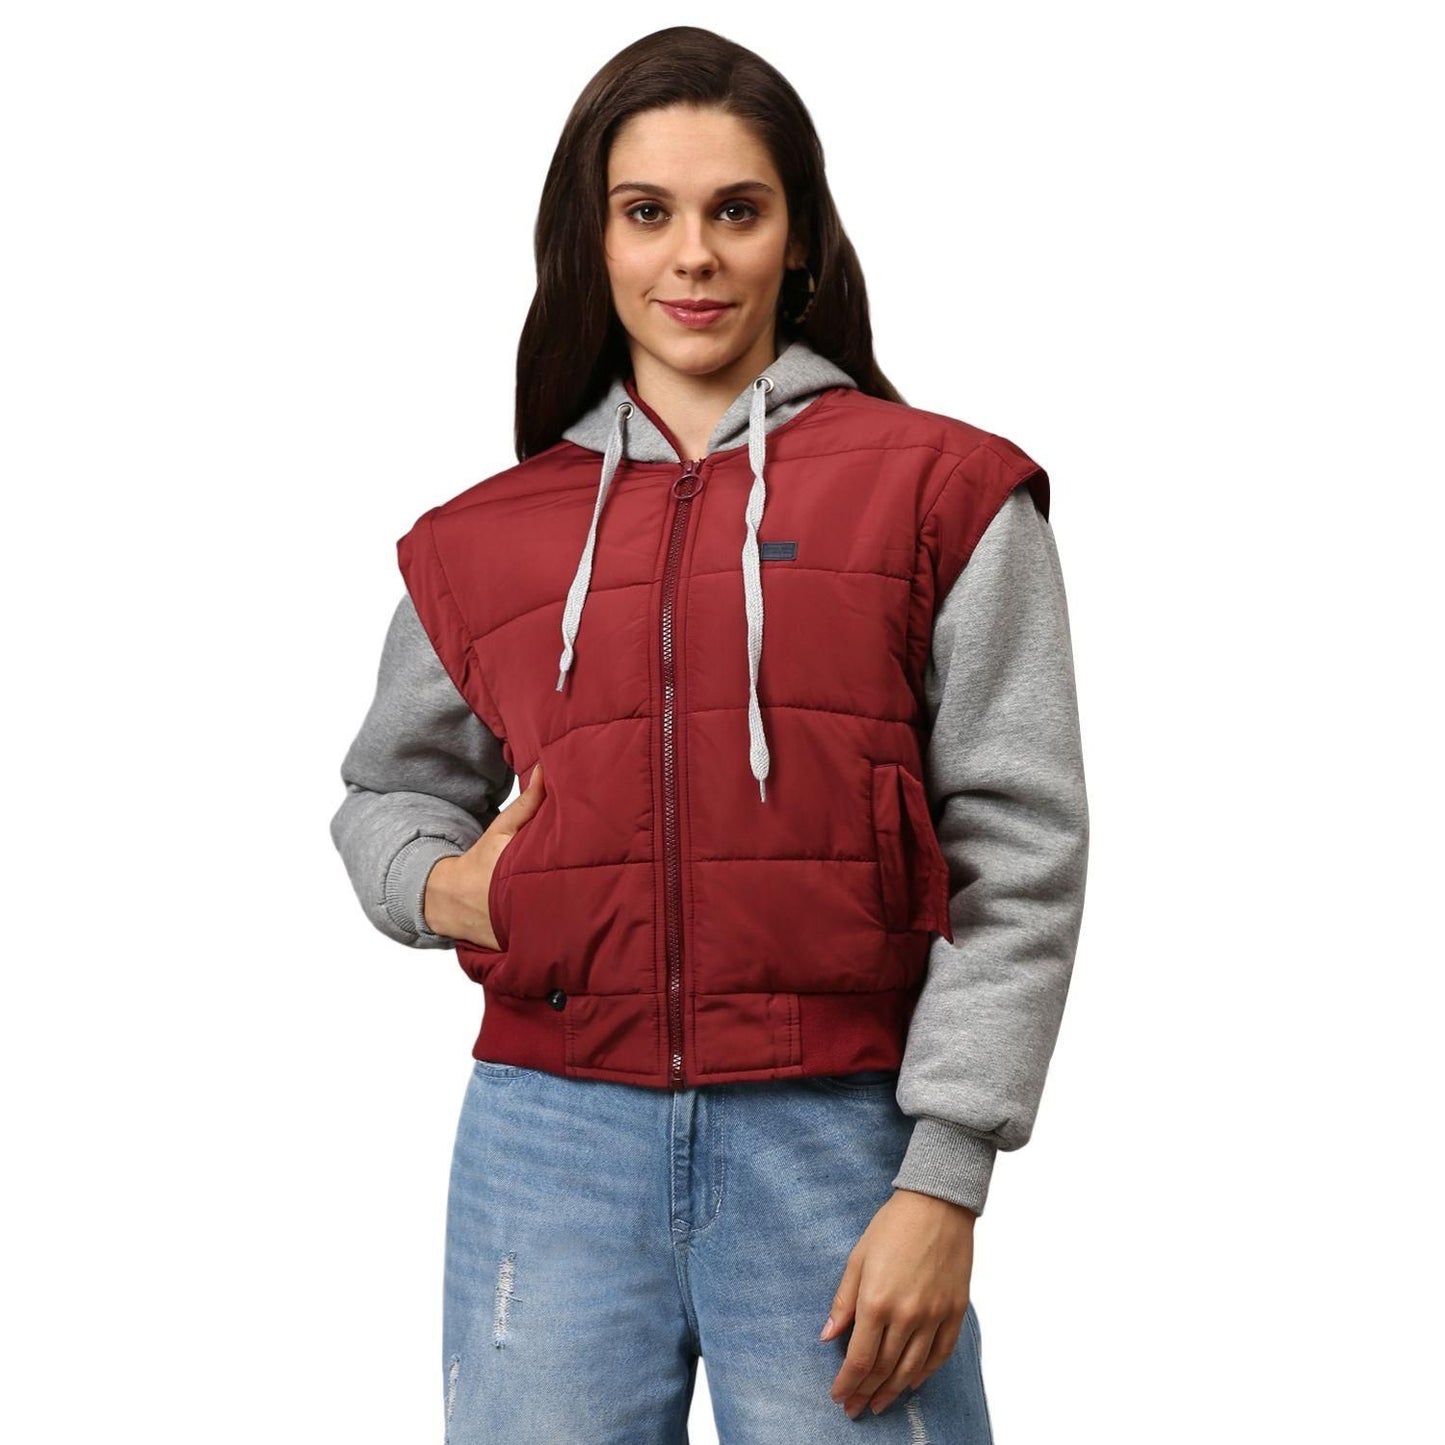 Campus Sutra Women Colorblocked Stylish Casual Bomber Jacket